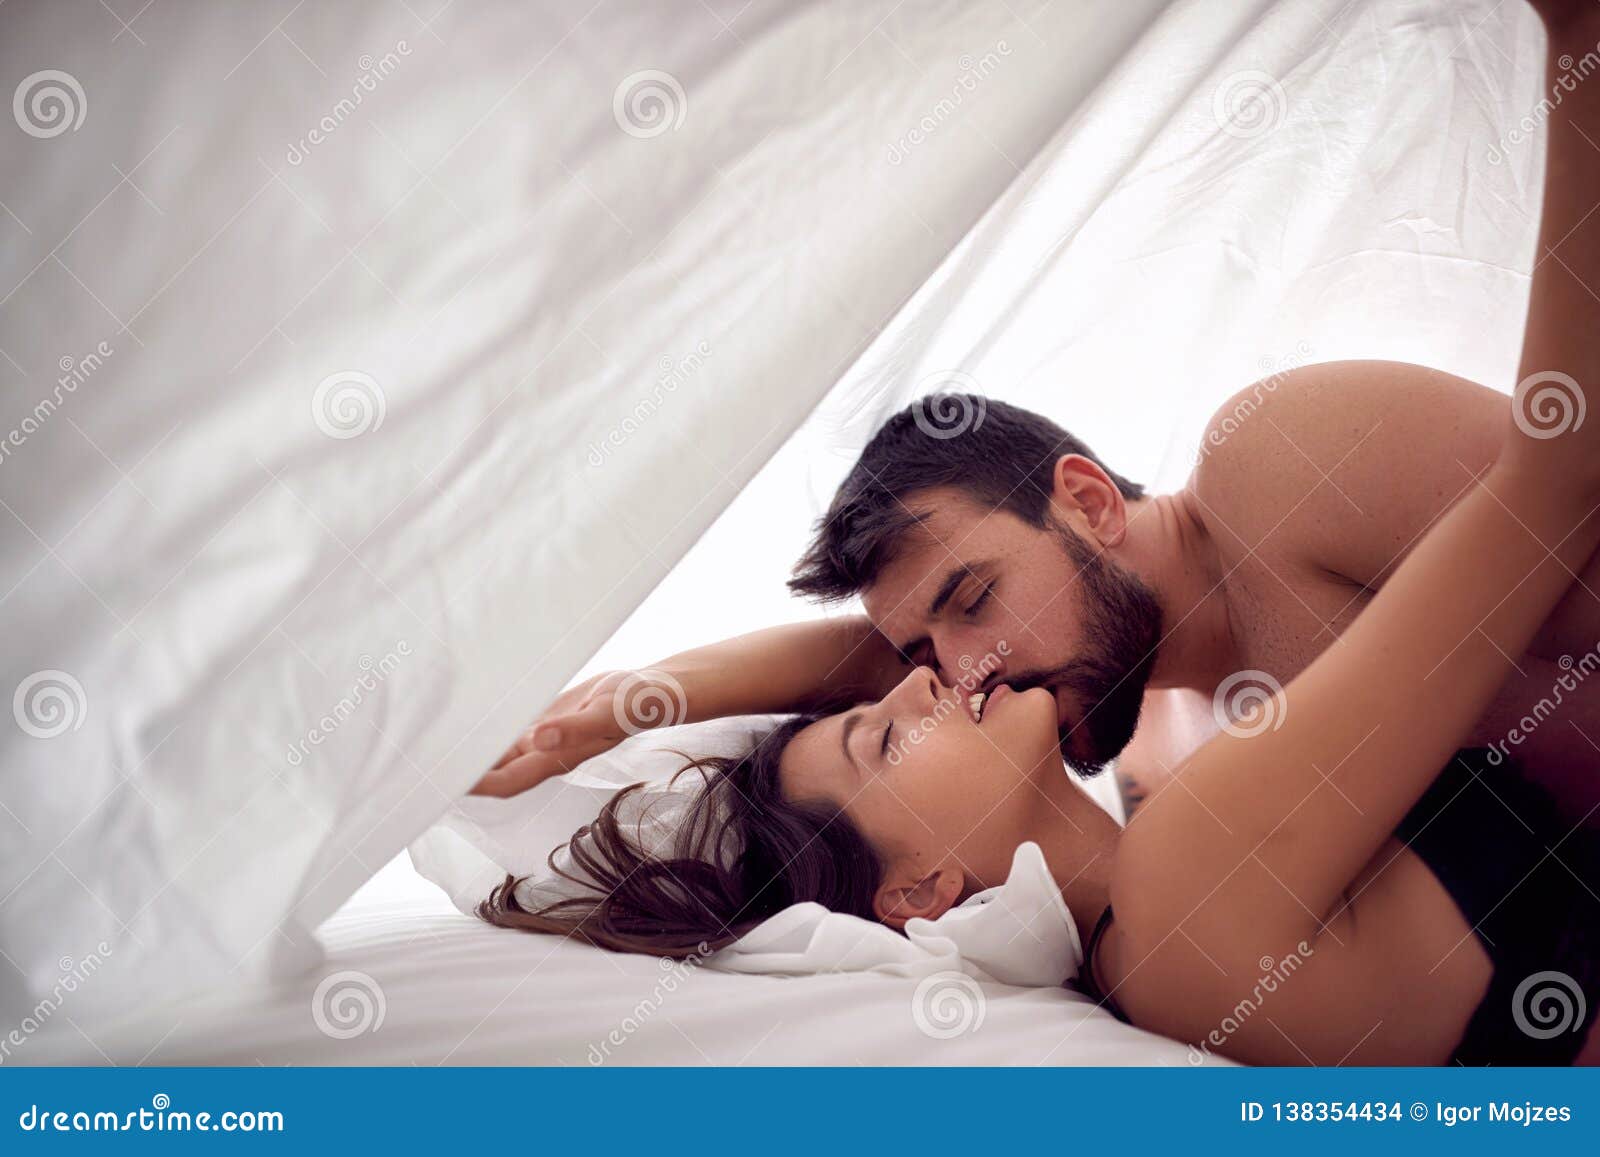 Couple Lovers Having Sex on a Bed in Morning with Lust and Love